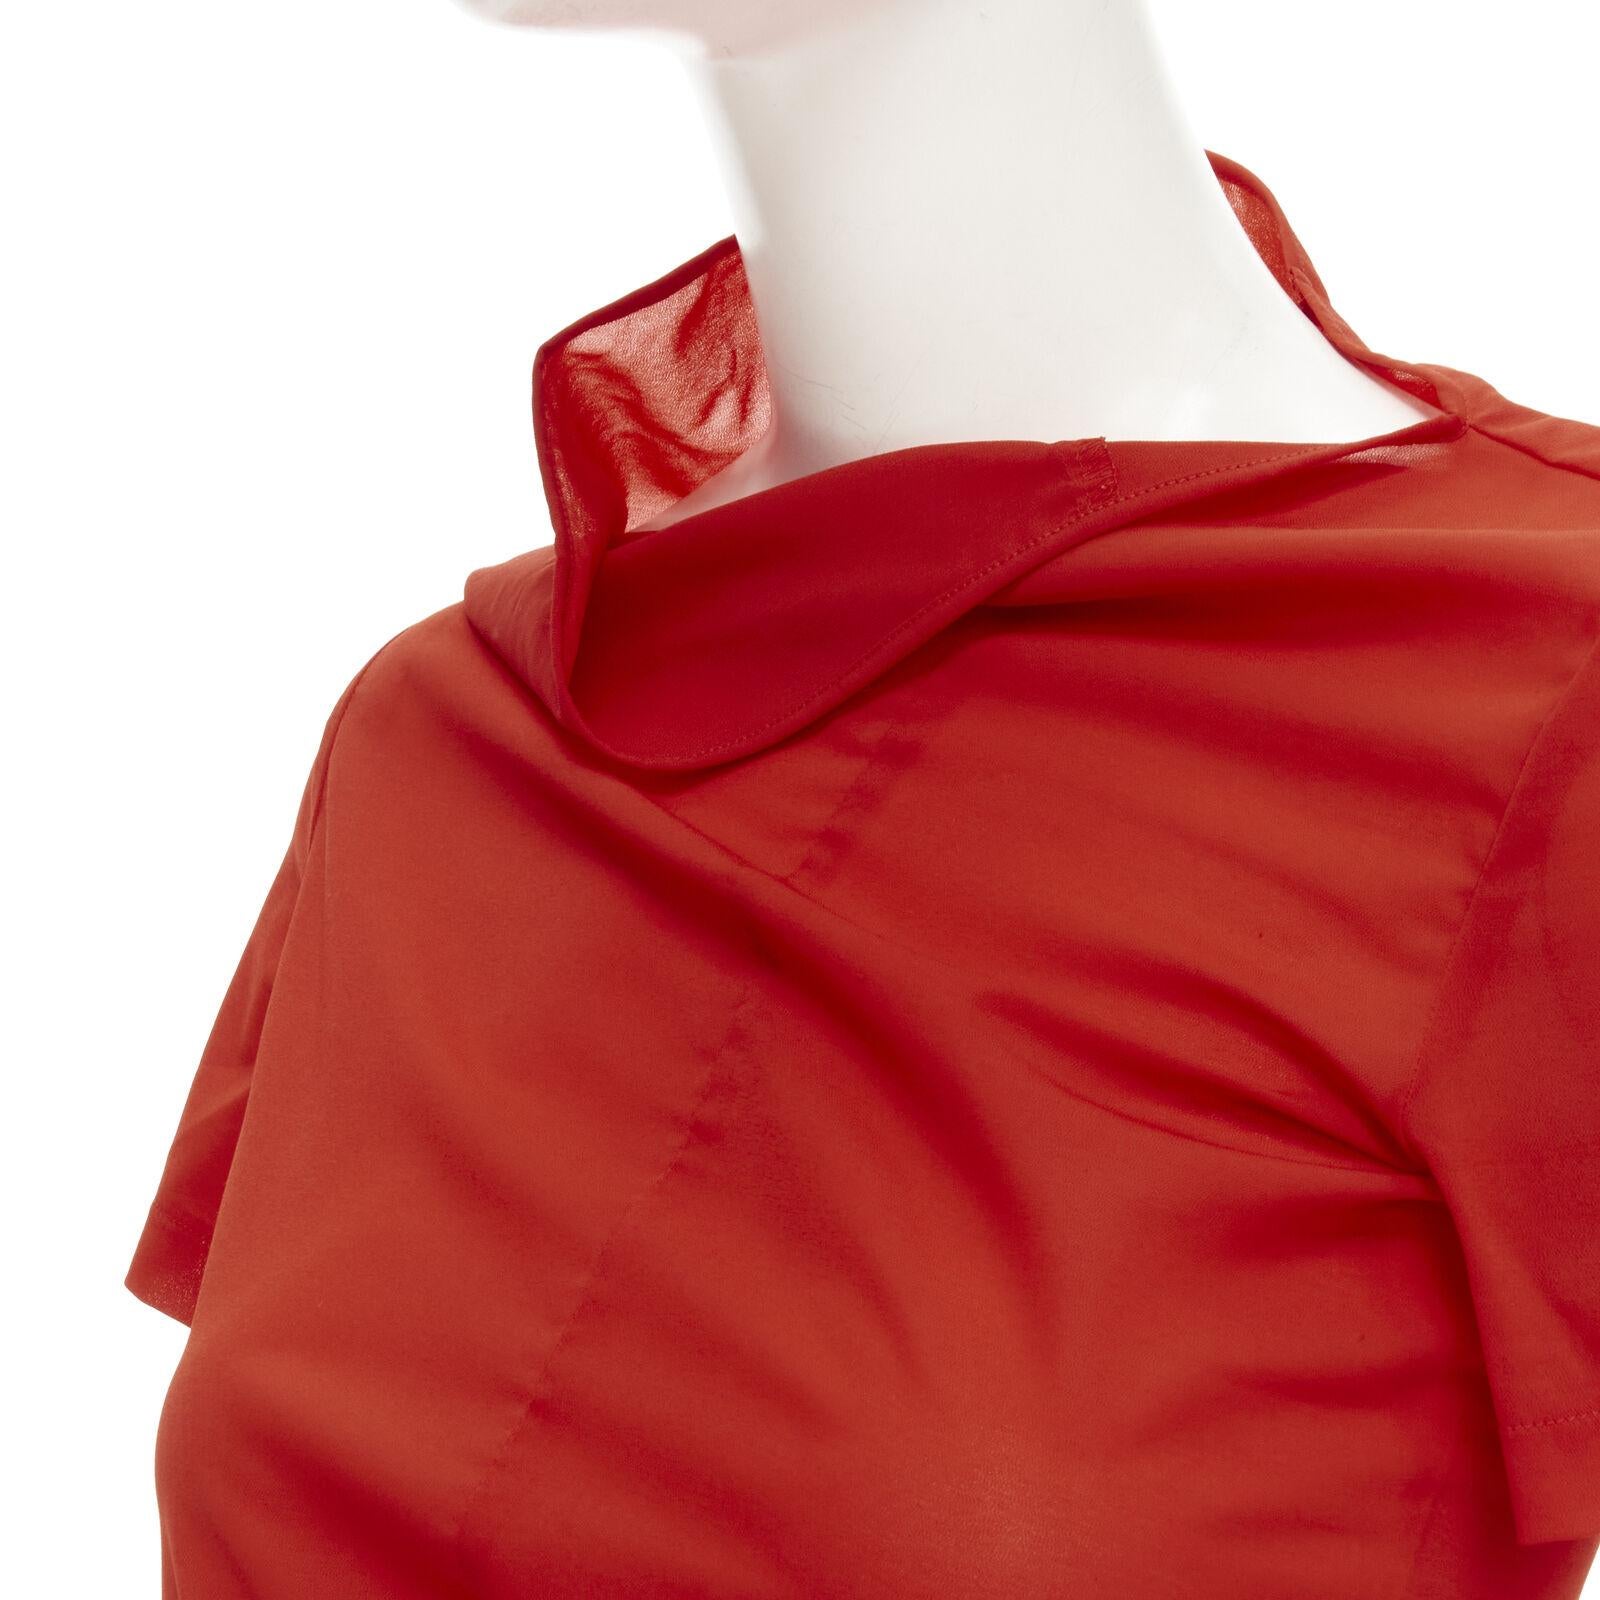 rare COMME DES GARCONS 1997 Lumps Bumps red asymmetric cowl neck bias cut top
Reference: CRTI/A00736
Brand: Comme Des Garcons
Designer: Rei Kawakubo
Model: Red short sleeve irregular top
Collection: Spring Summer 1997
Material: Polyester,